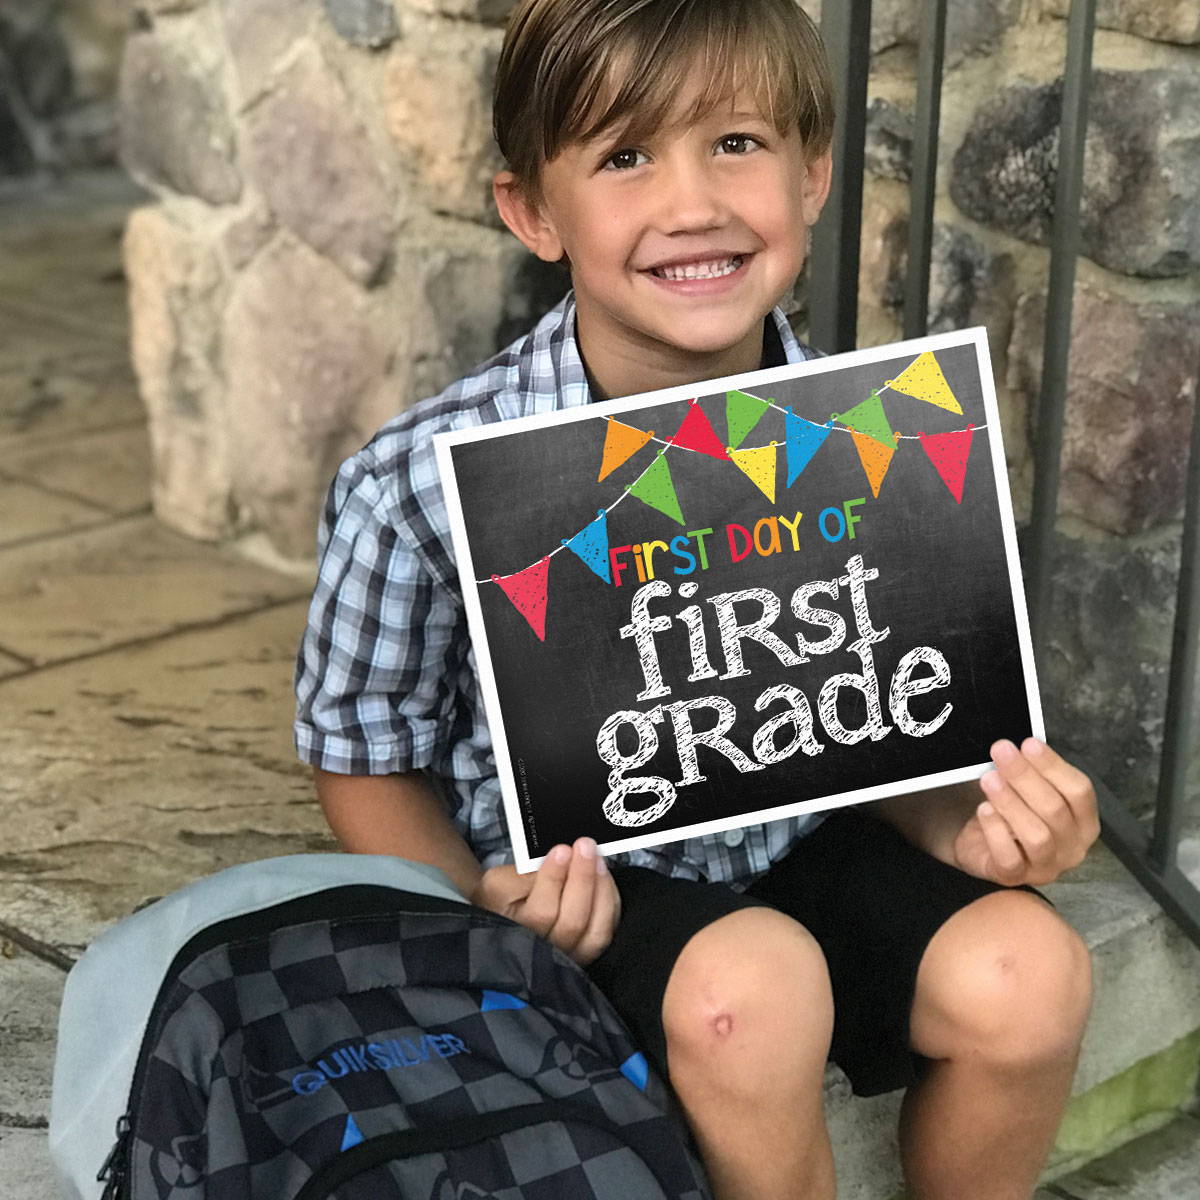 First & Last Day of School Signs